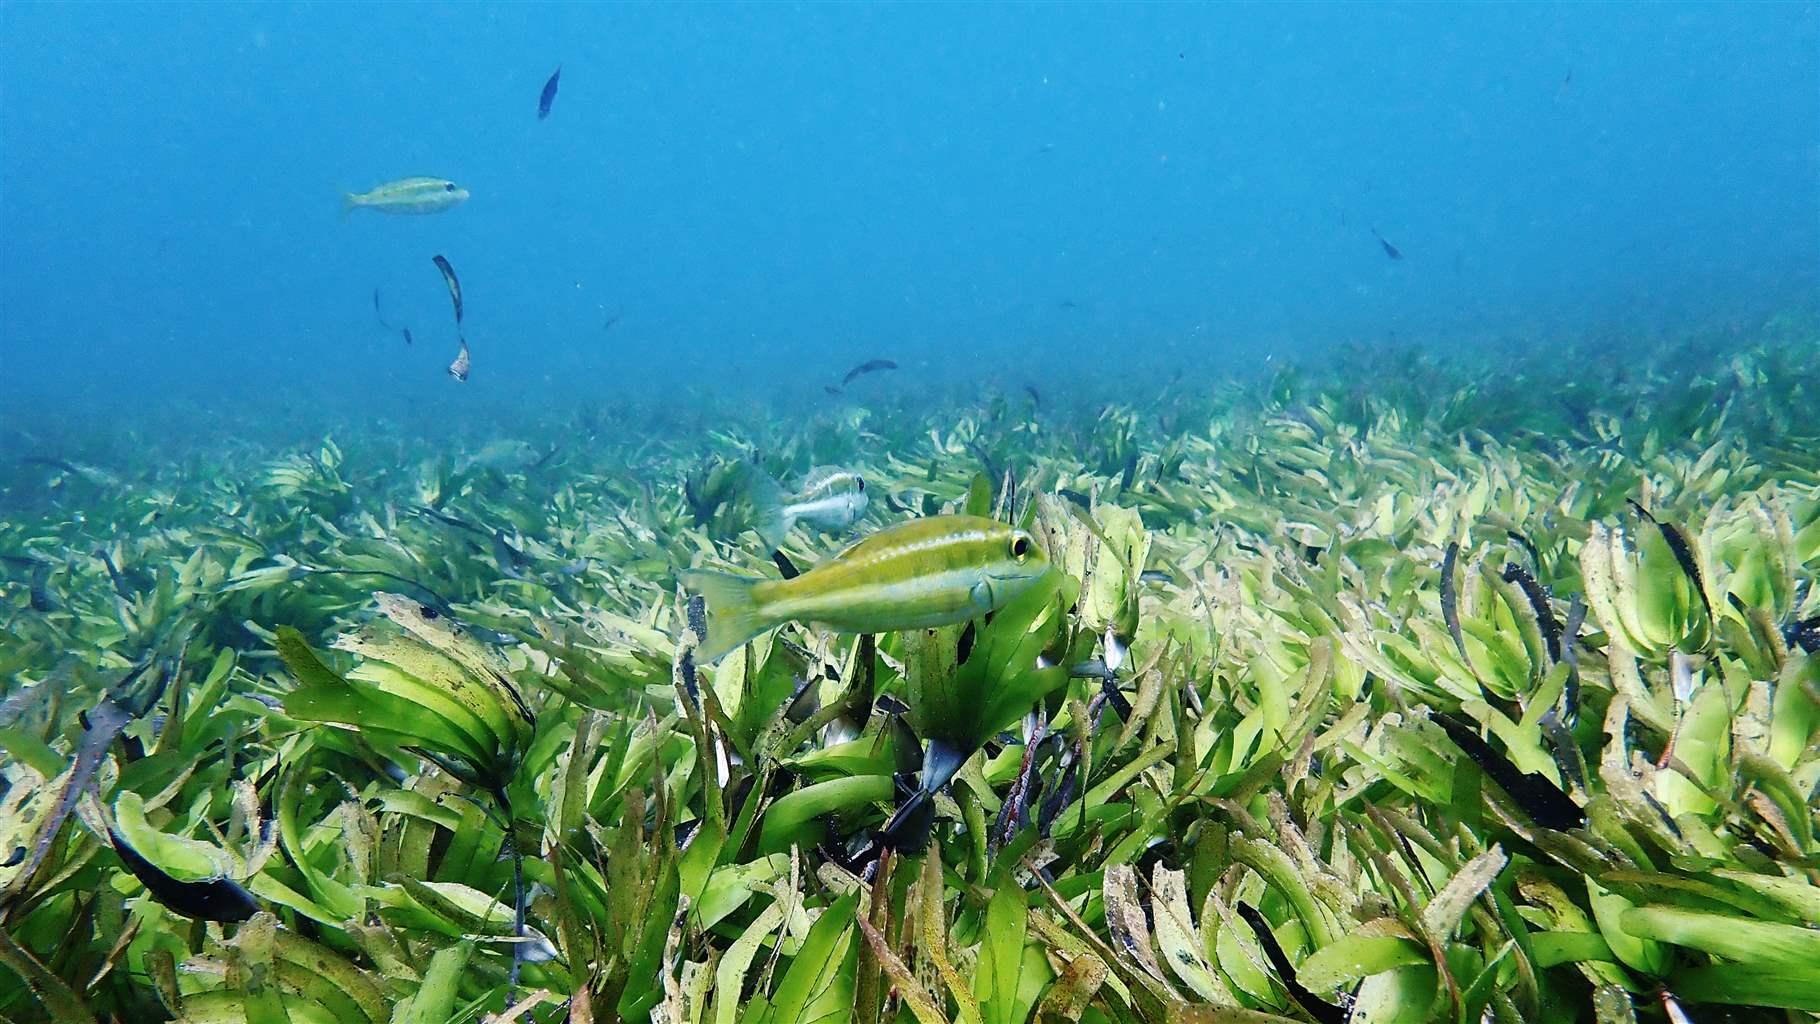 This seagrass meadow in Seychelles is home to a diverse range of marine life and sequesters and stores carbon—a nature-based solution to climate change that’s worth protecting. 